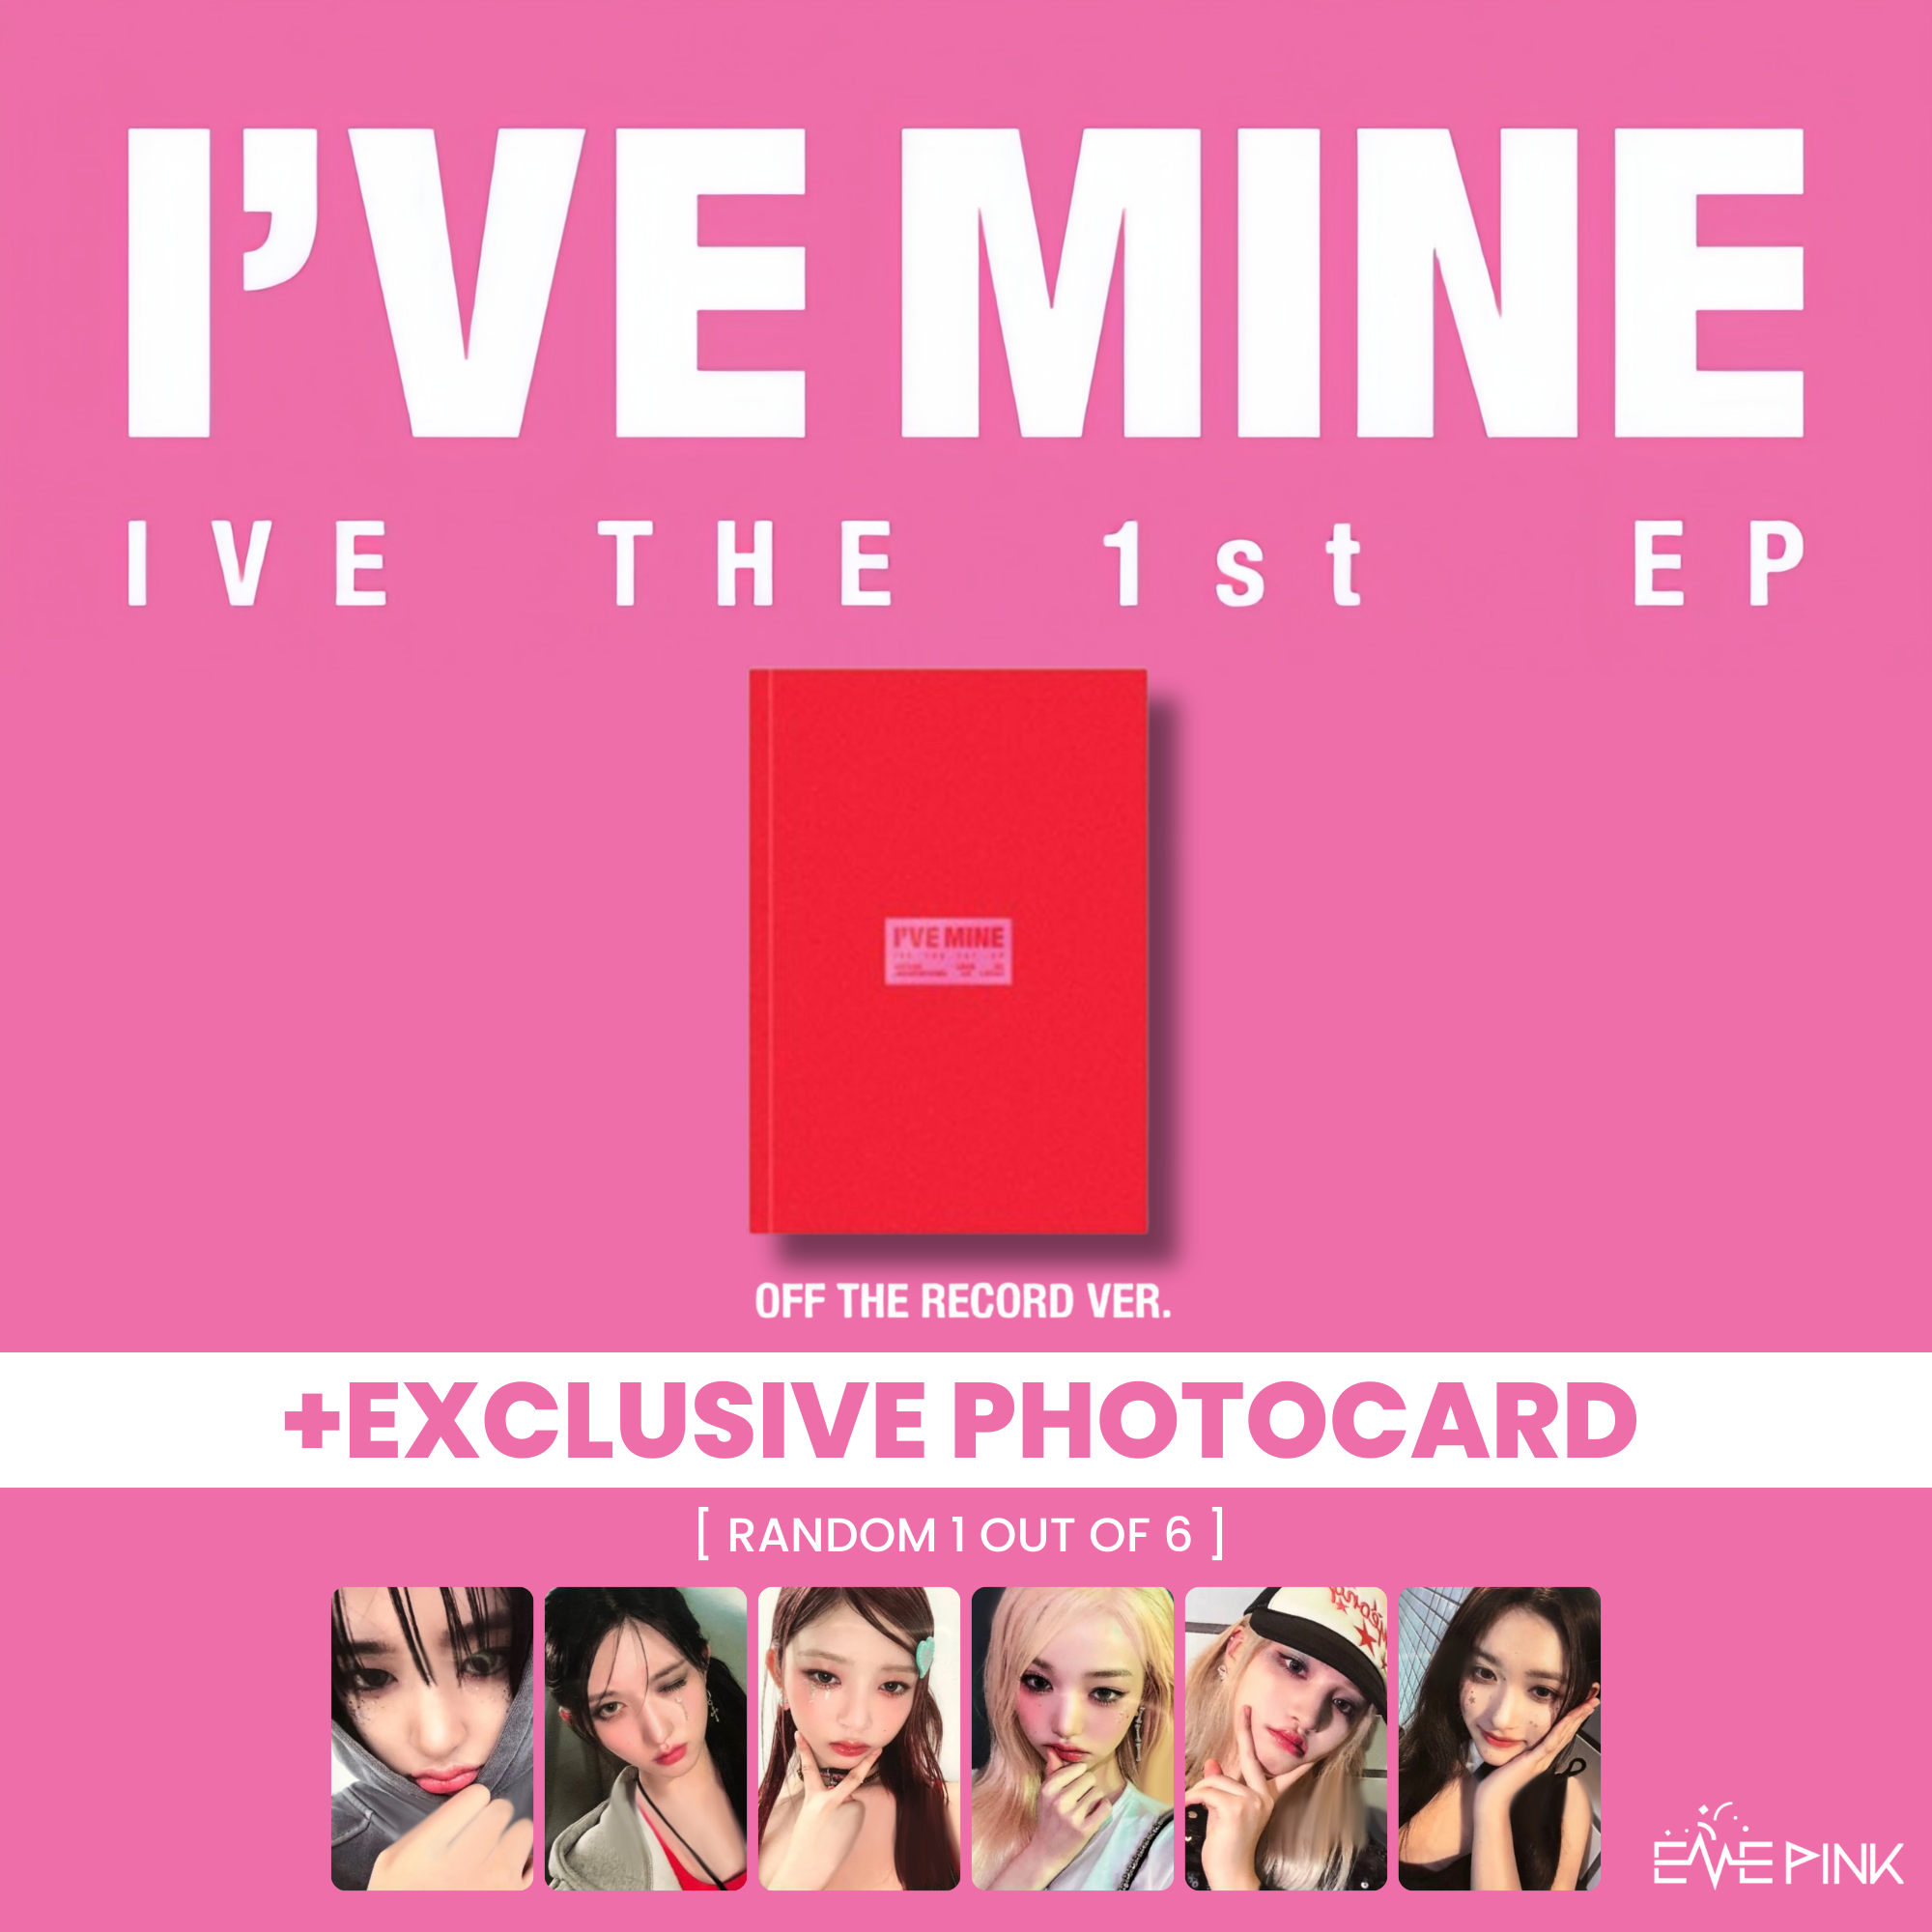 IVE (아이브) THE 1ST EP - [I'VE MINE] (+EXCLUSIVE PHOTOCARD) – EVE